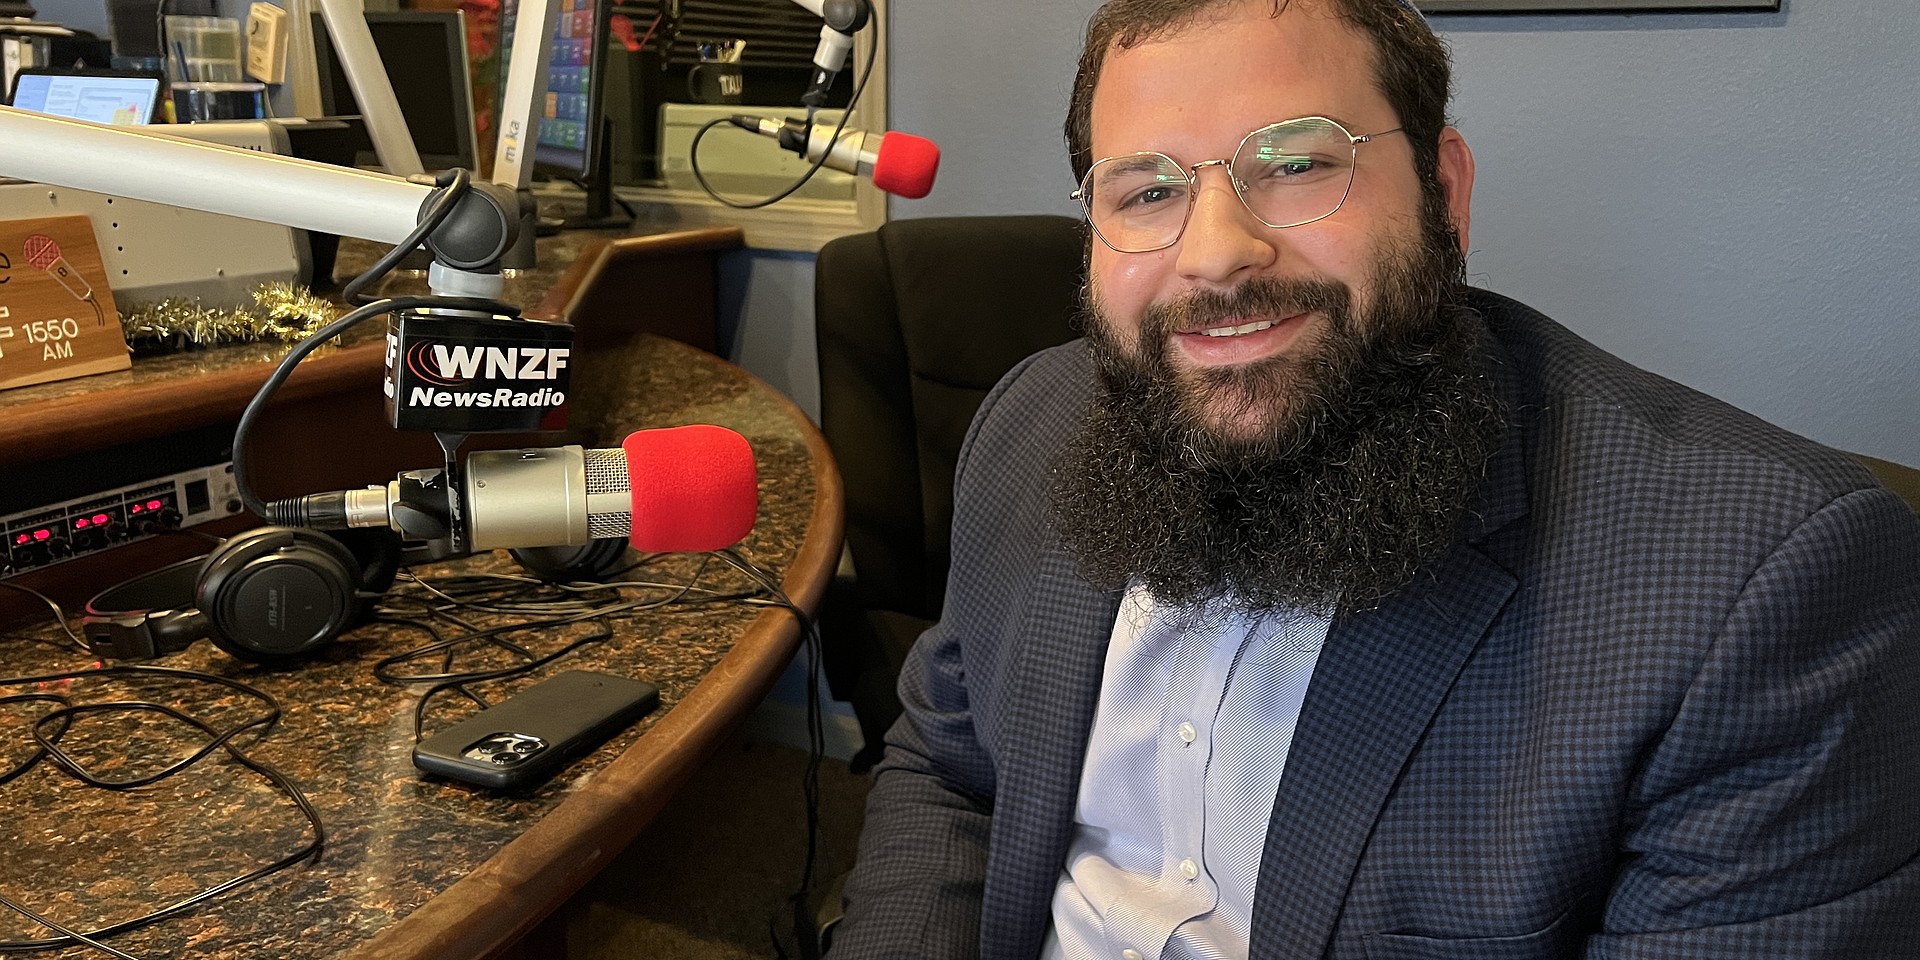 Rabbi Levi Ezagui, of the Chabad Jewish Center of Palm Coast, was interviewed for the Dec. 3 episode of "Faith in Flagler," which airs 9 a.m. Sundays on 94.9 FM WNZF, or streaming at www.flaglerbroadcasting.com. Photo by Brian McMillan